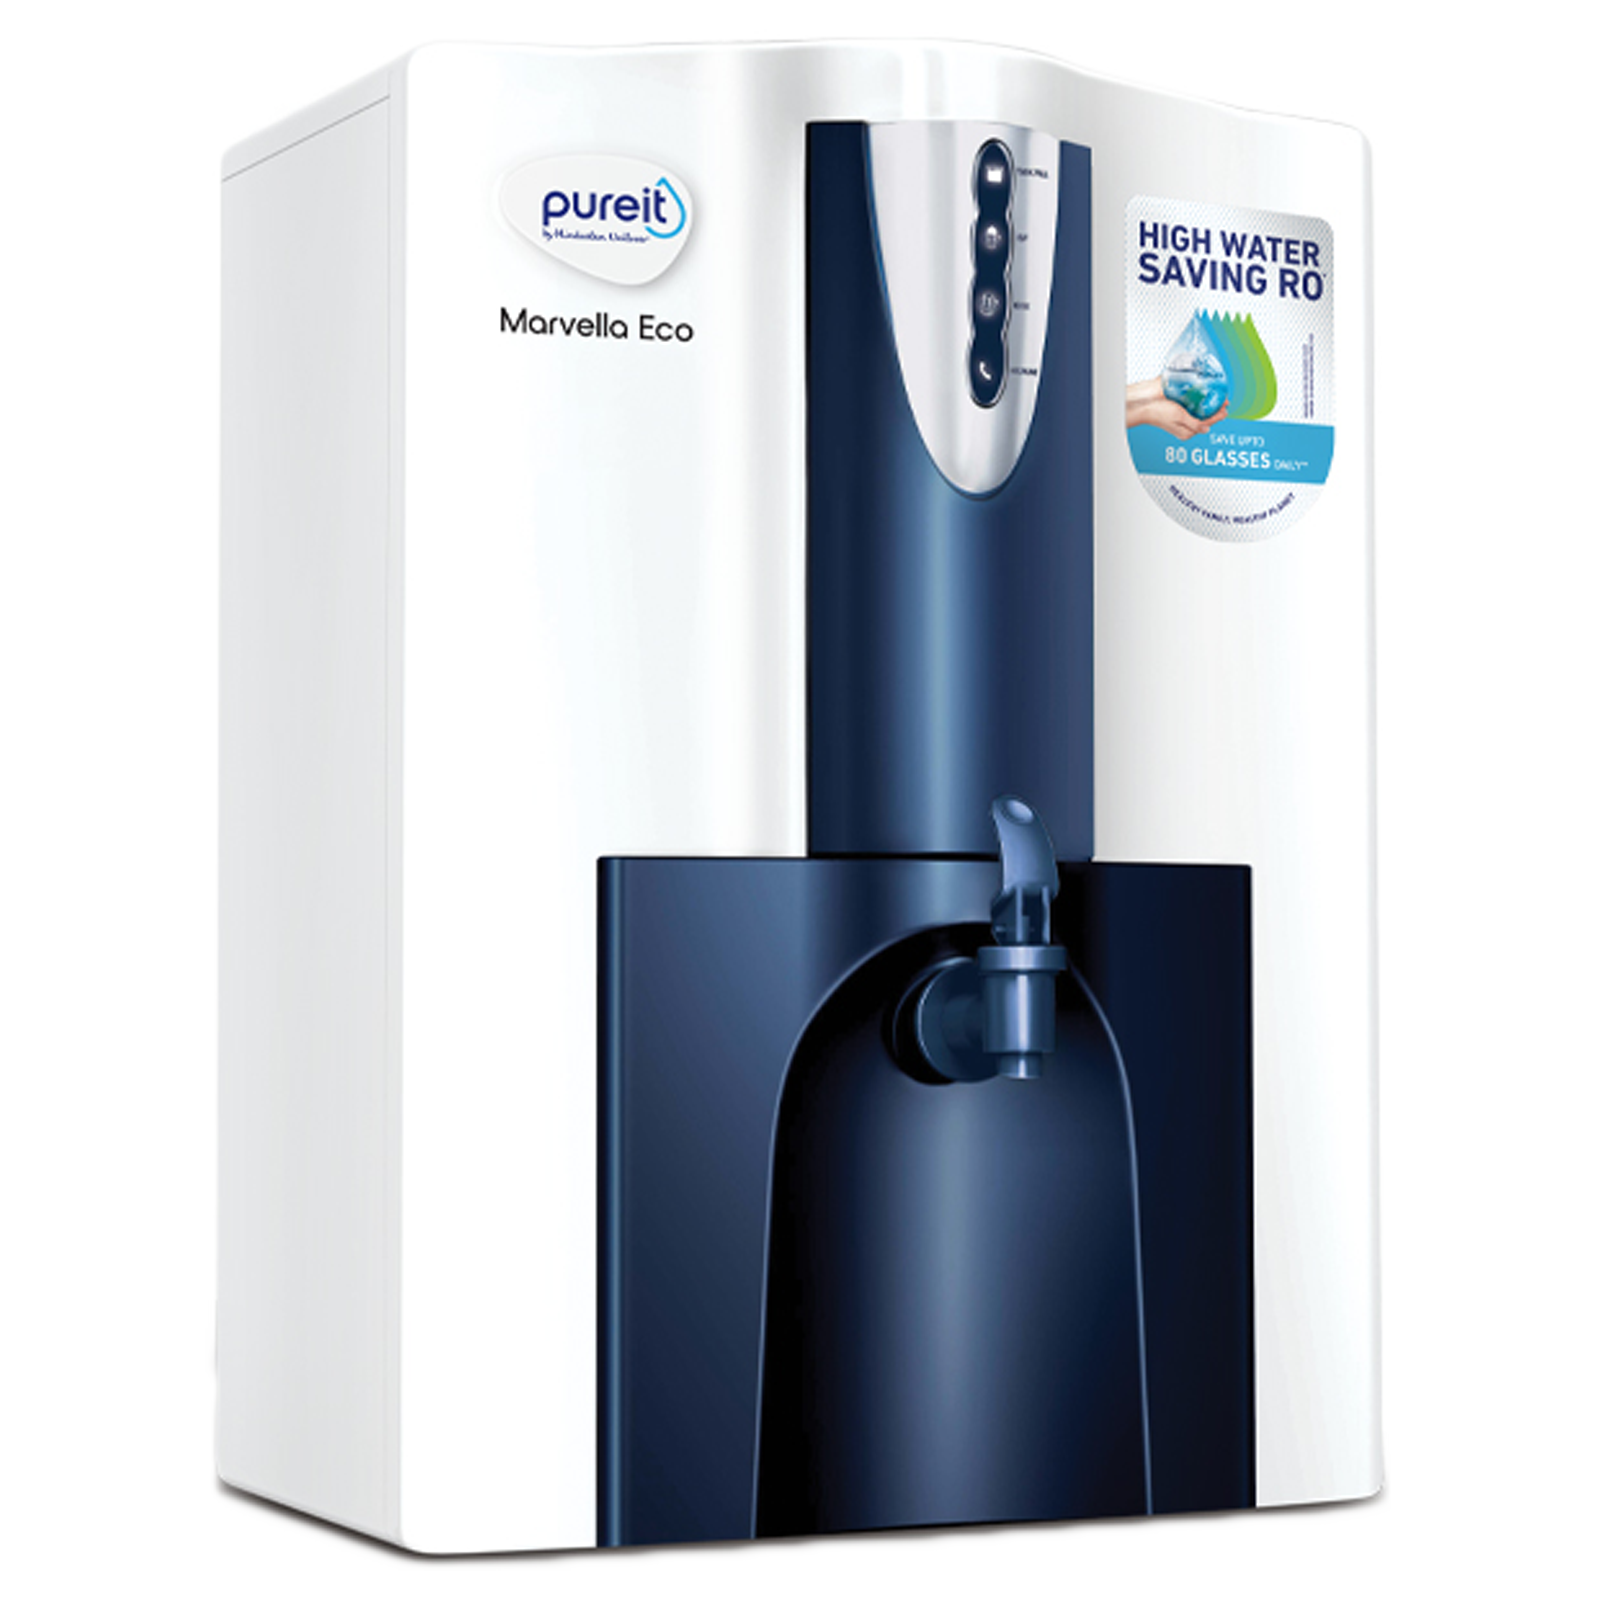 Pureit Marvella Eco RO+UV Electrical Water Purifier (7 Stage Purification, WPNT500, White and Blue)